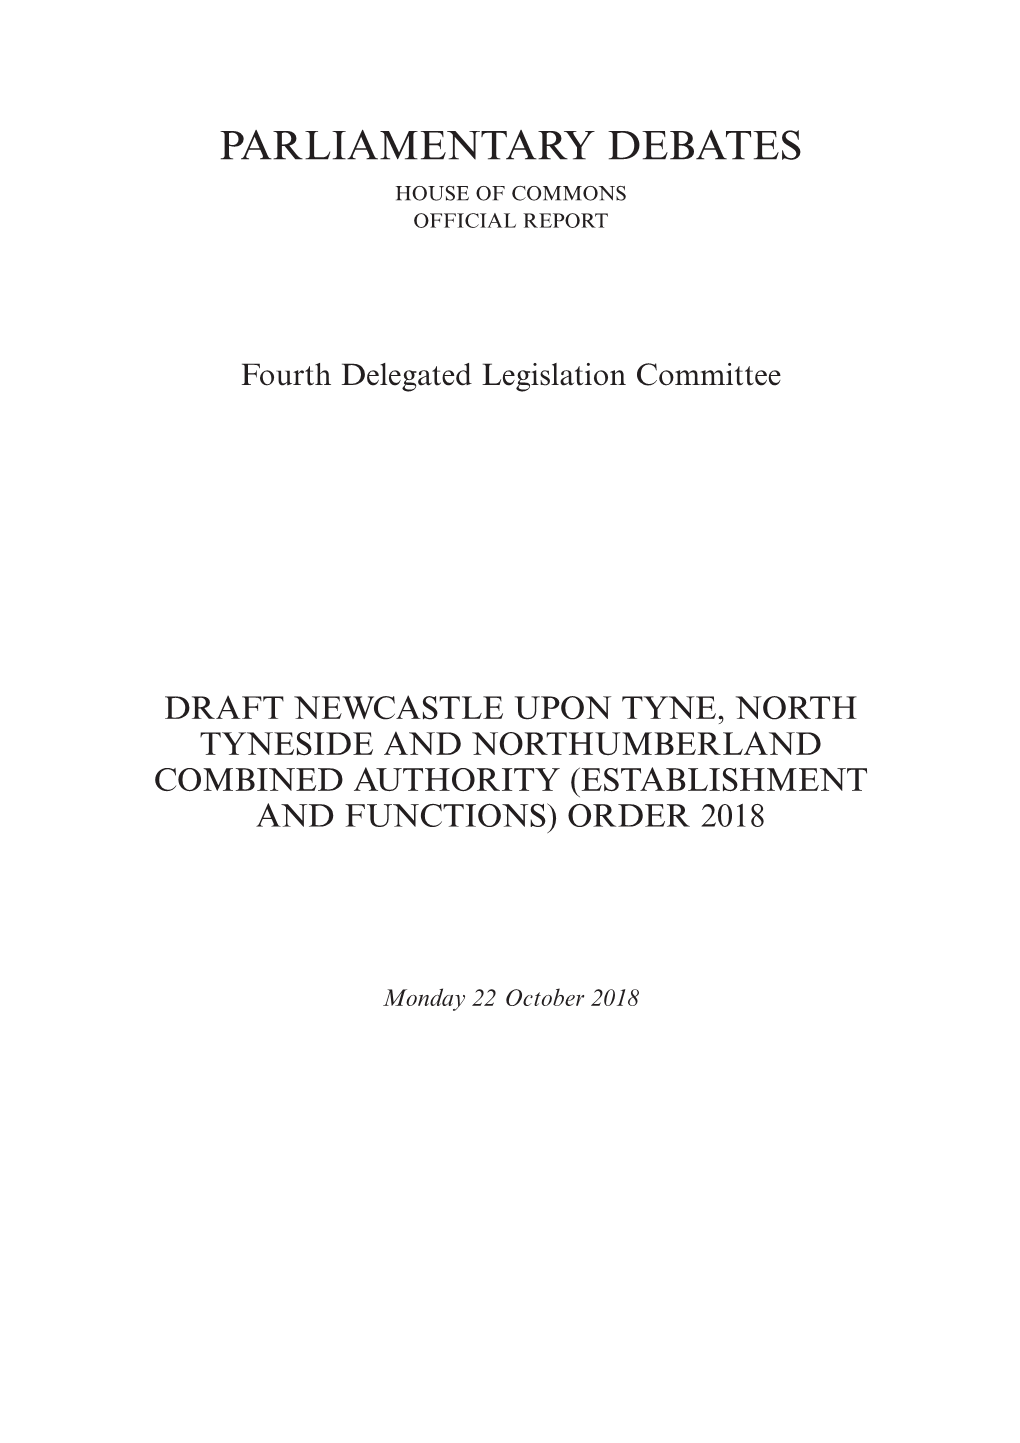 Draft Newcastle Upon Tyne, North Tyneside and Northumberland Combined Authority (Establishment and Functions) Order 2018